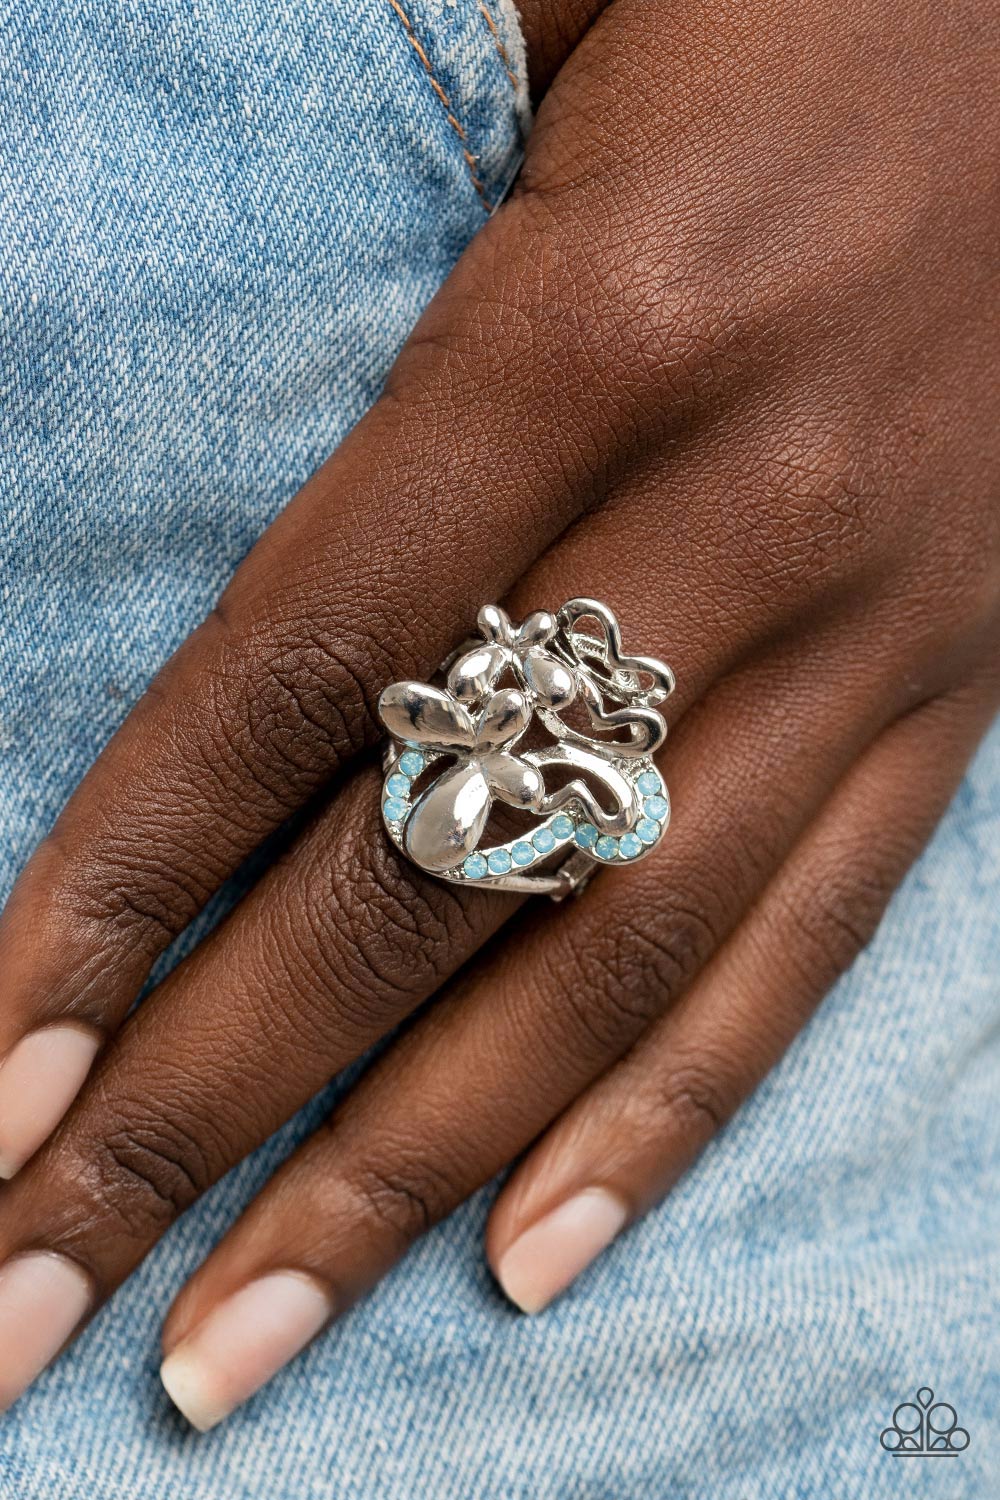 Fluttering Flashback Blue Butterfly Ring - Paparazzi Accessories-on model - CarasShop.com - $5 Jewelry by Cara Jewels